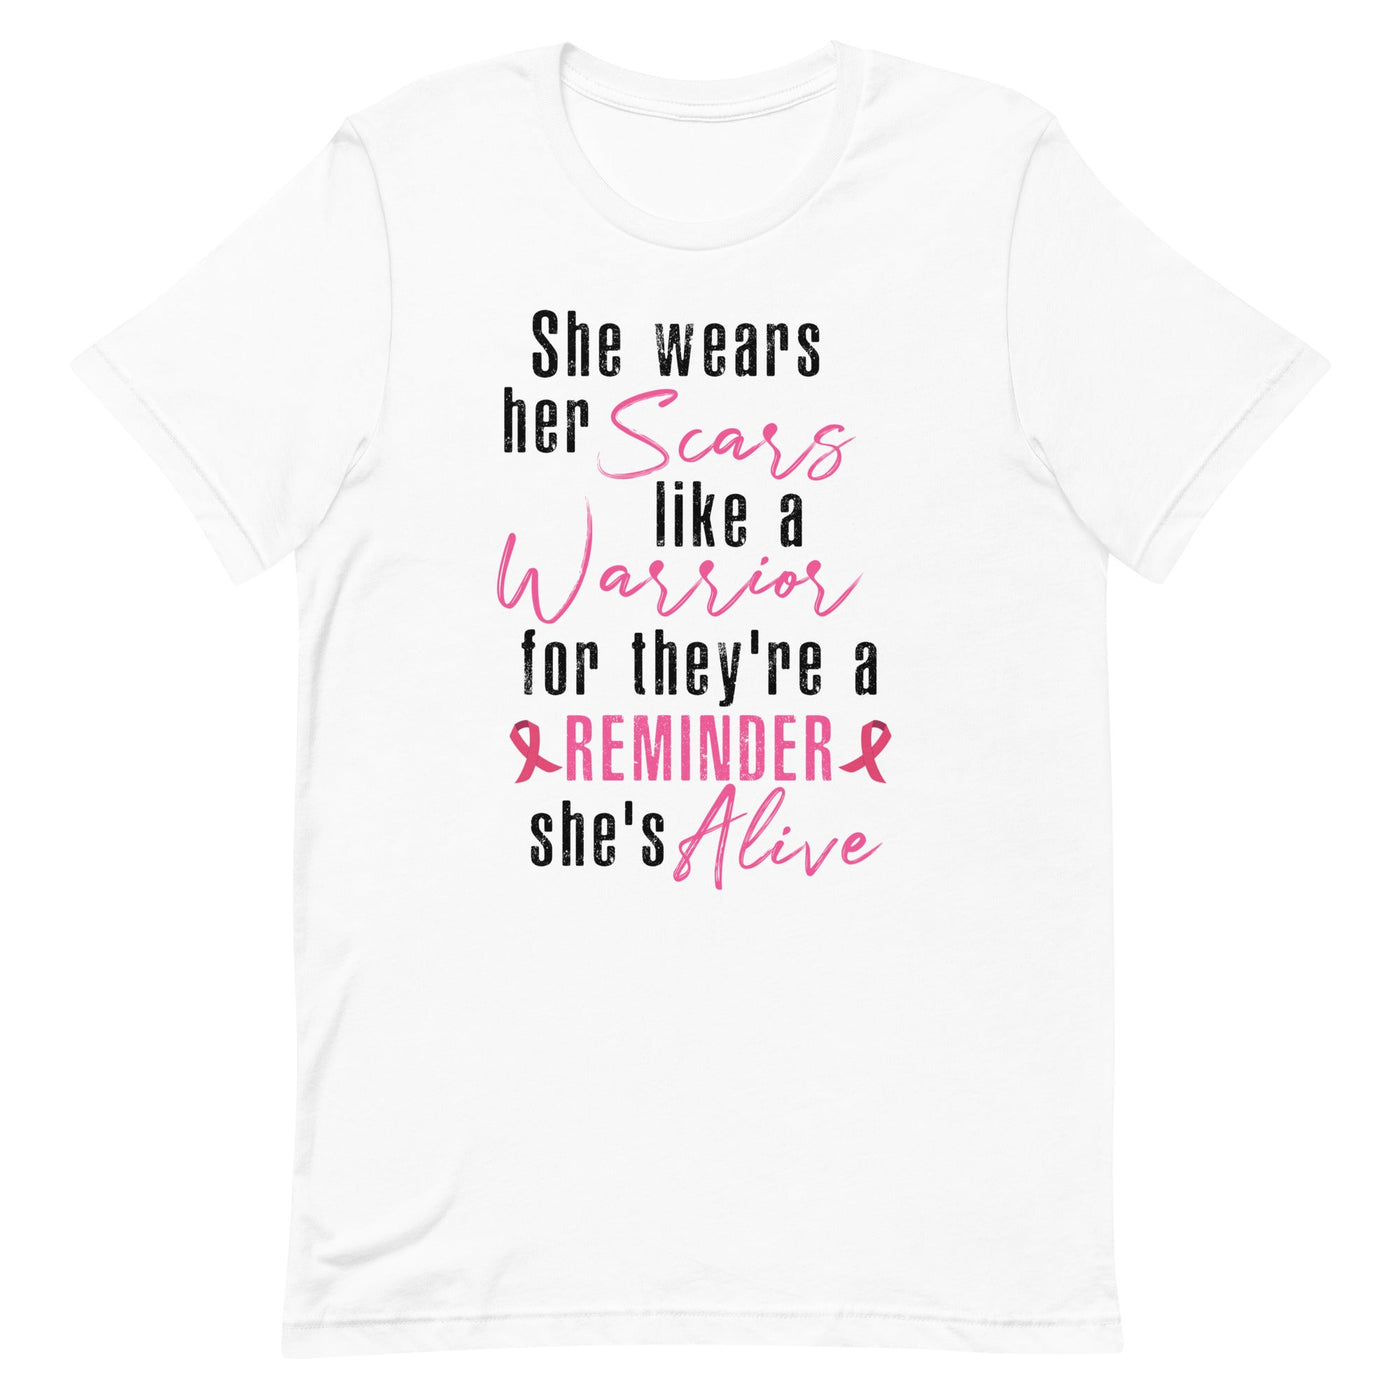 SHE WEARS HER SCARS LIKE A WARRIOR FOR THEY'RE A REMINDER SHE'S ALIVE WOMEN'S T-SHIRT- BLACK AND PINK FONT White S 